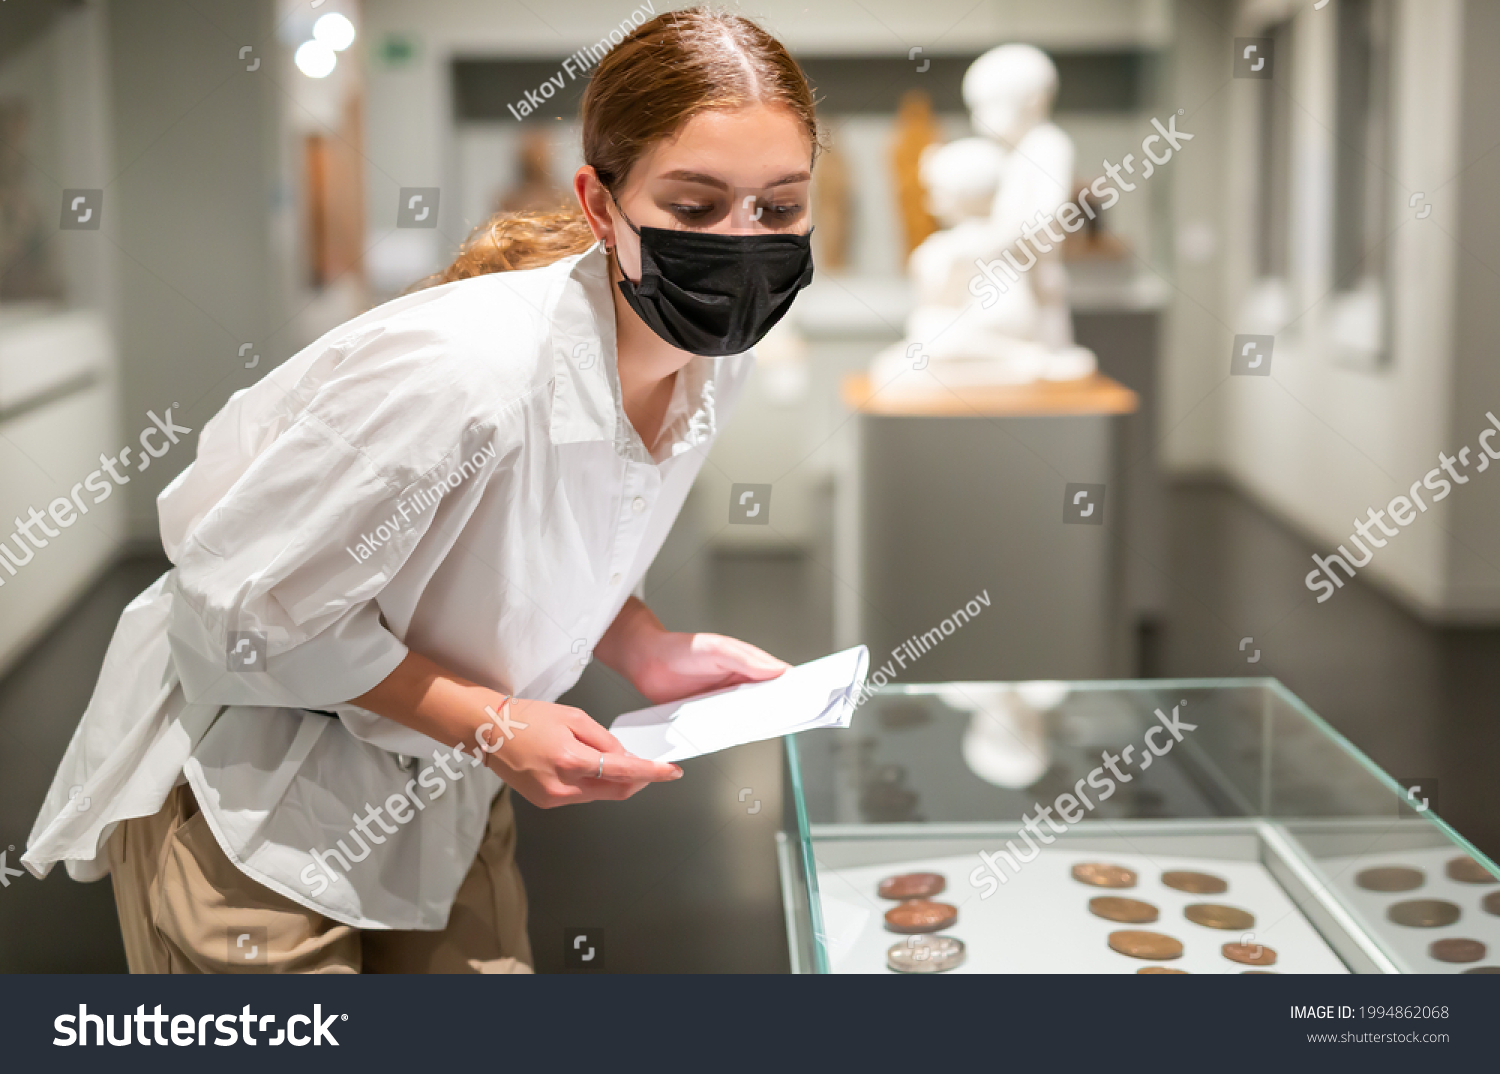 Young positive female in protective face mask with information brochure visiting museum and looking at the exposition of ancient coins #1994862068